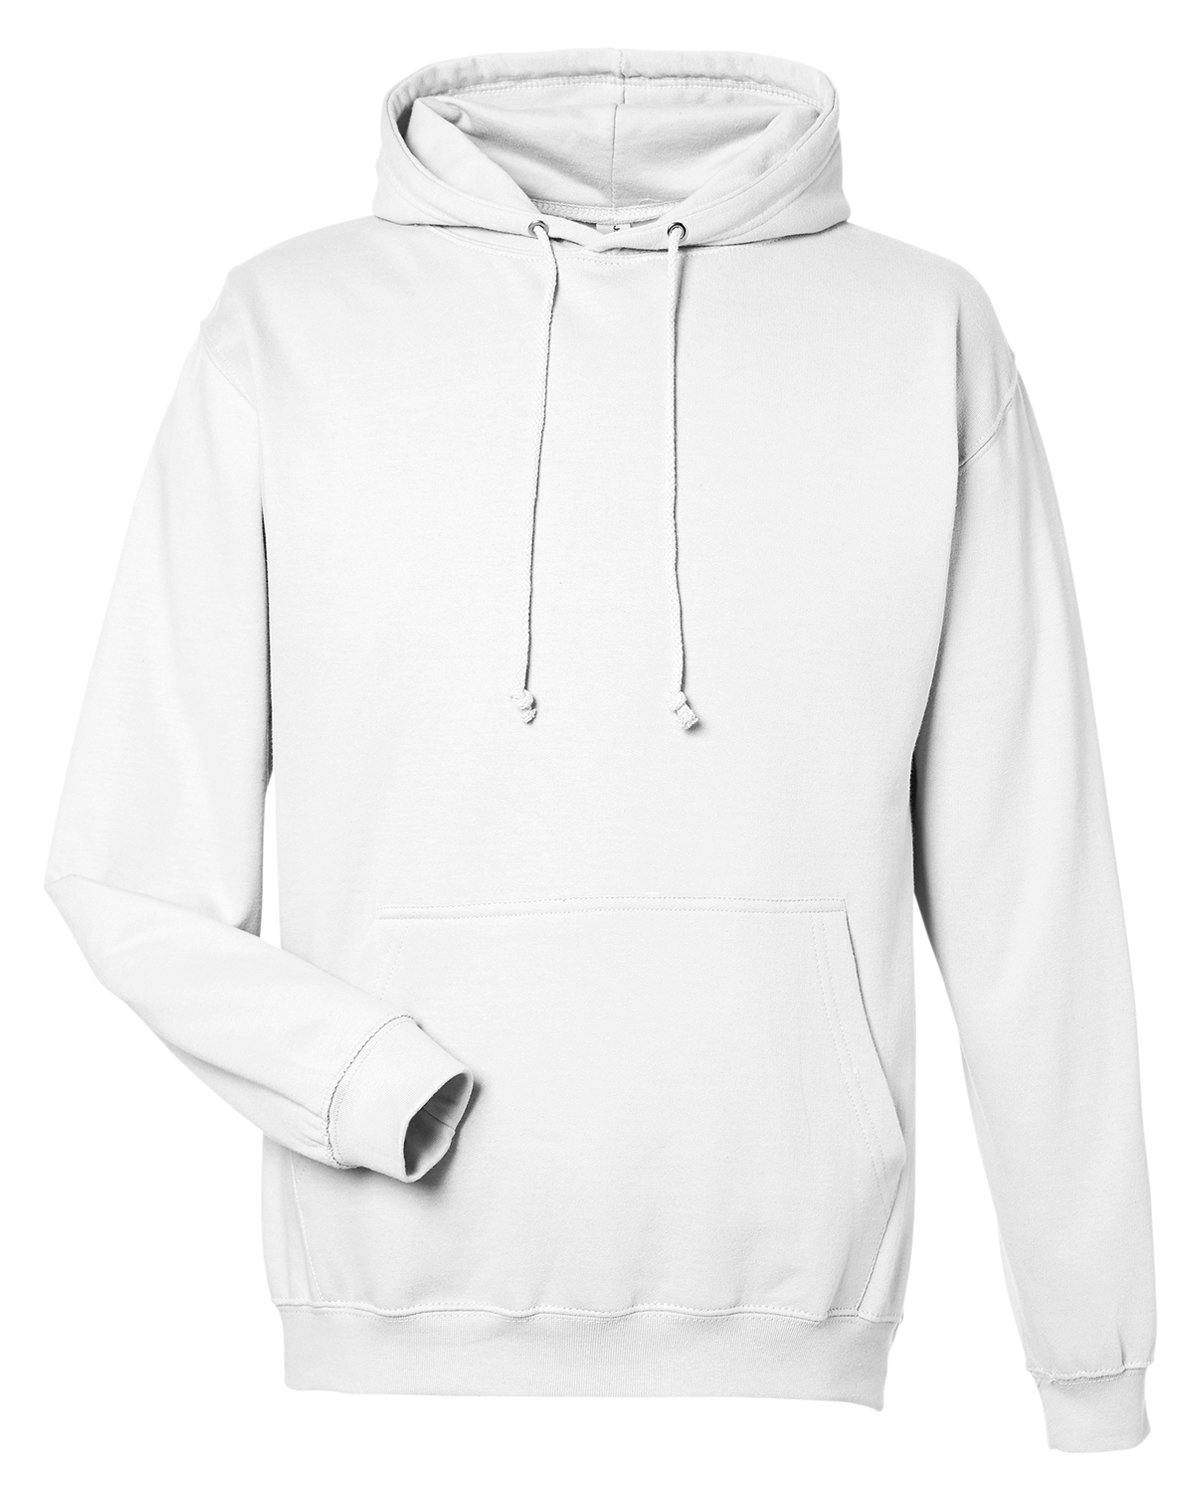 Image for Men's 80/20 Midweight College Hooded Sweatshirt